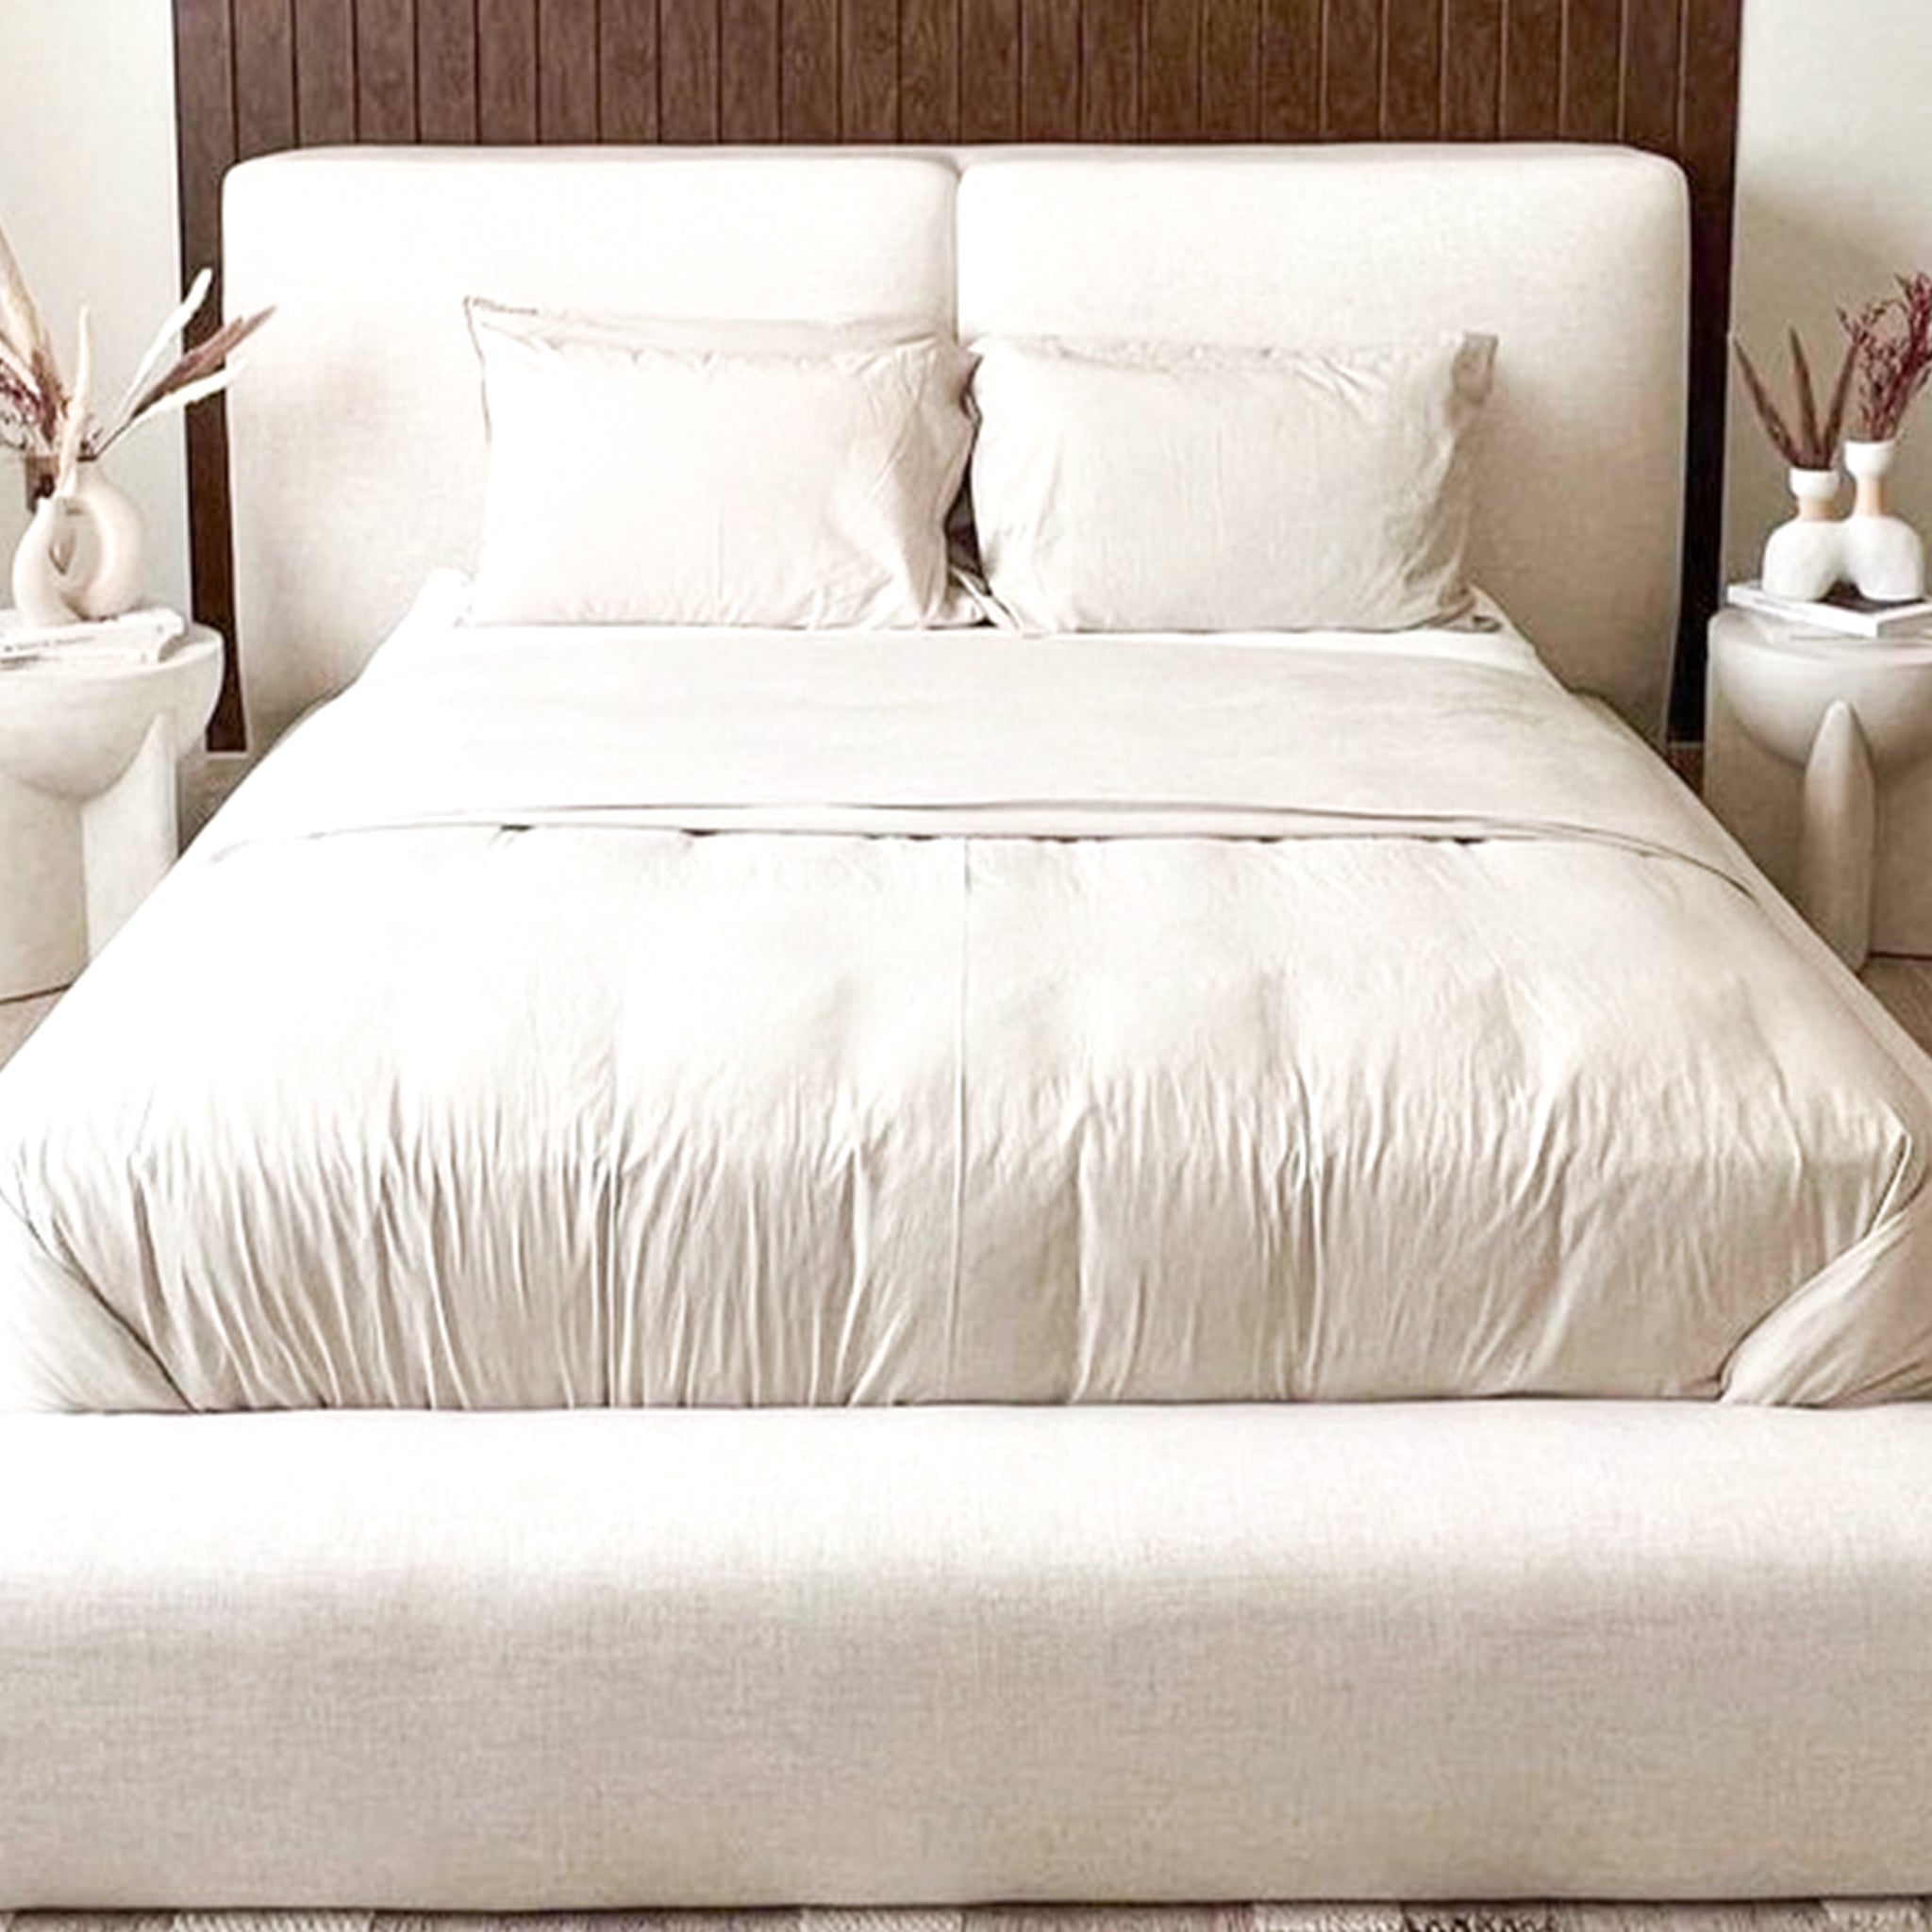 Modern white platform bed with woven storage baskets. Stylish and functional bedroom furniture.